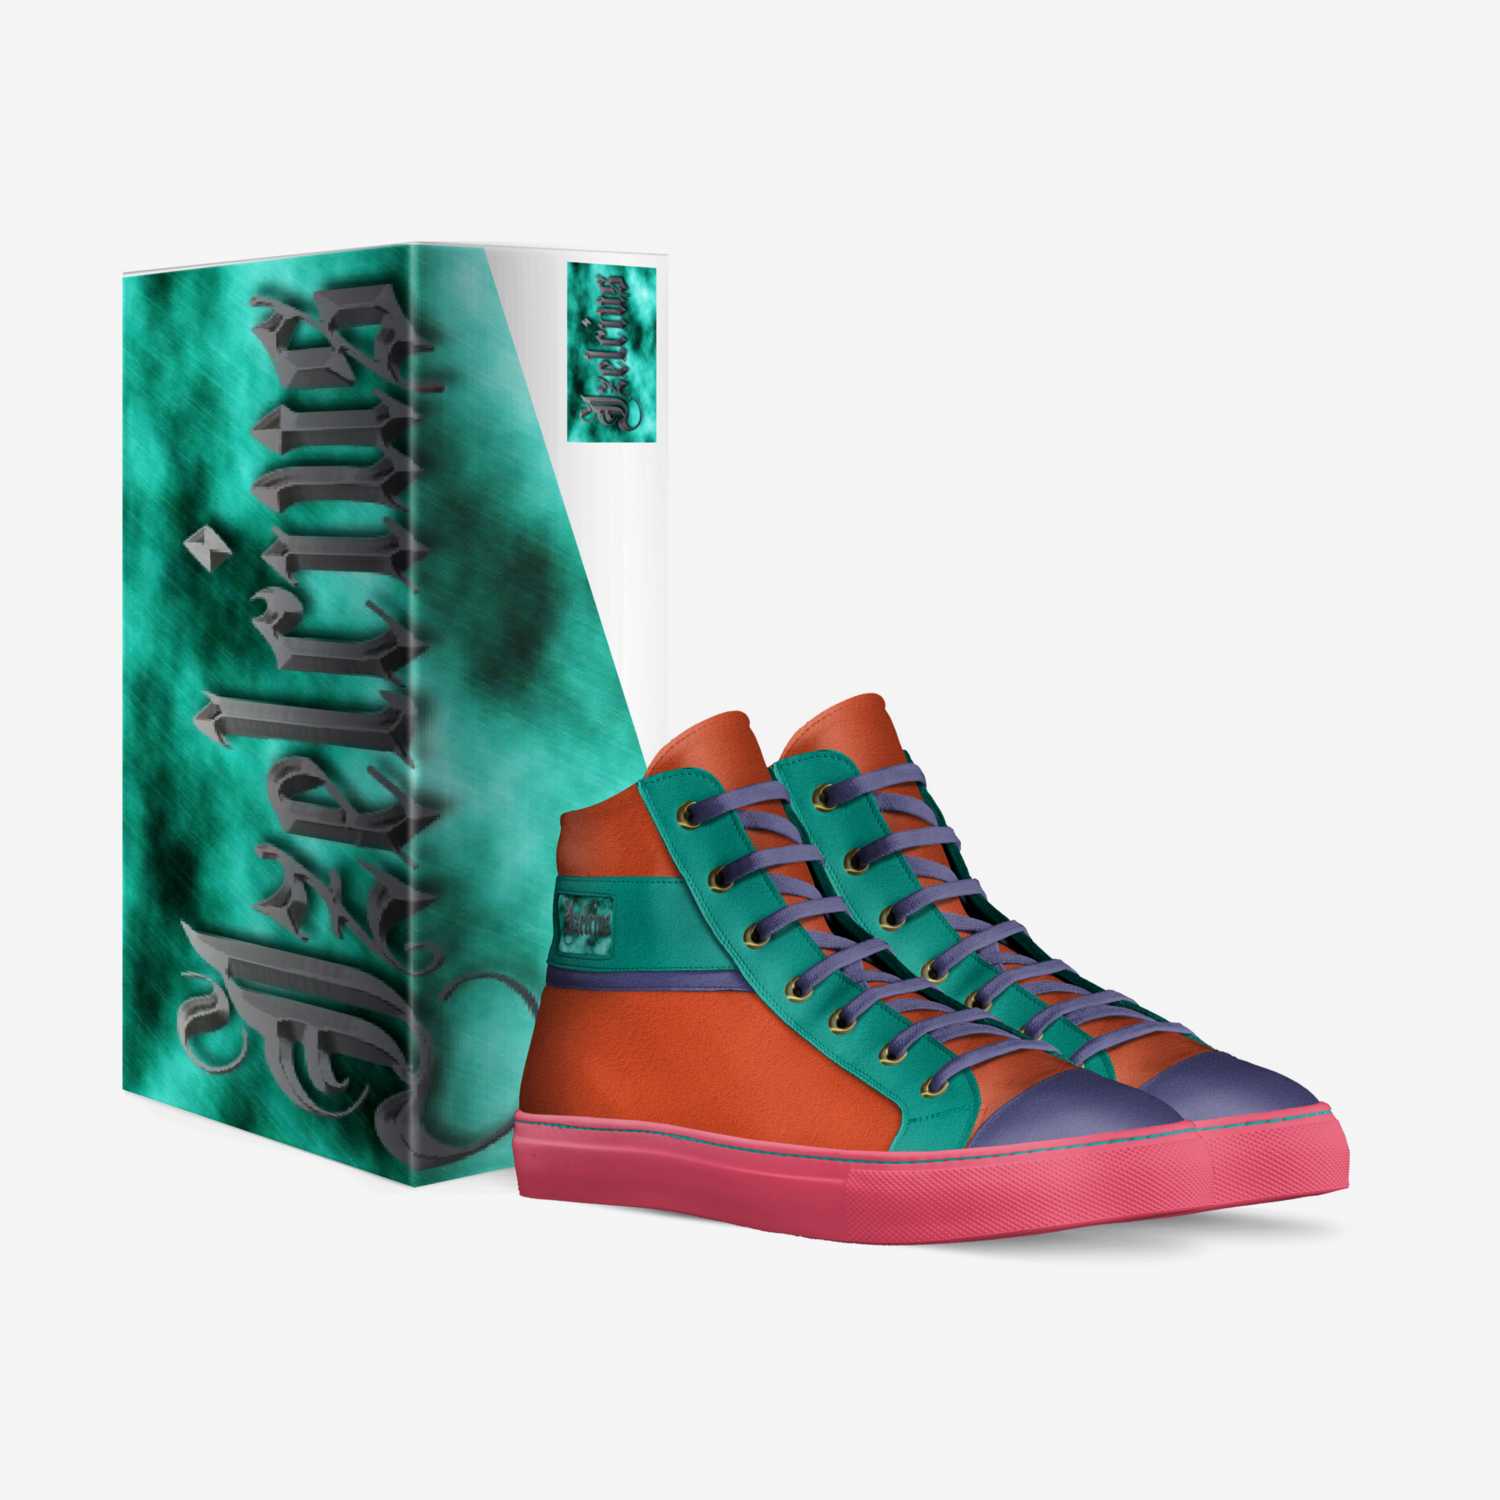 Izelcius custom made in Italy shoes by Carolyn Wilks | Box view